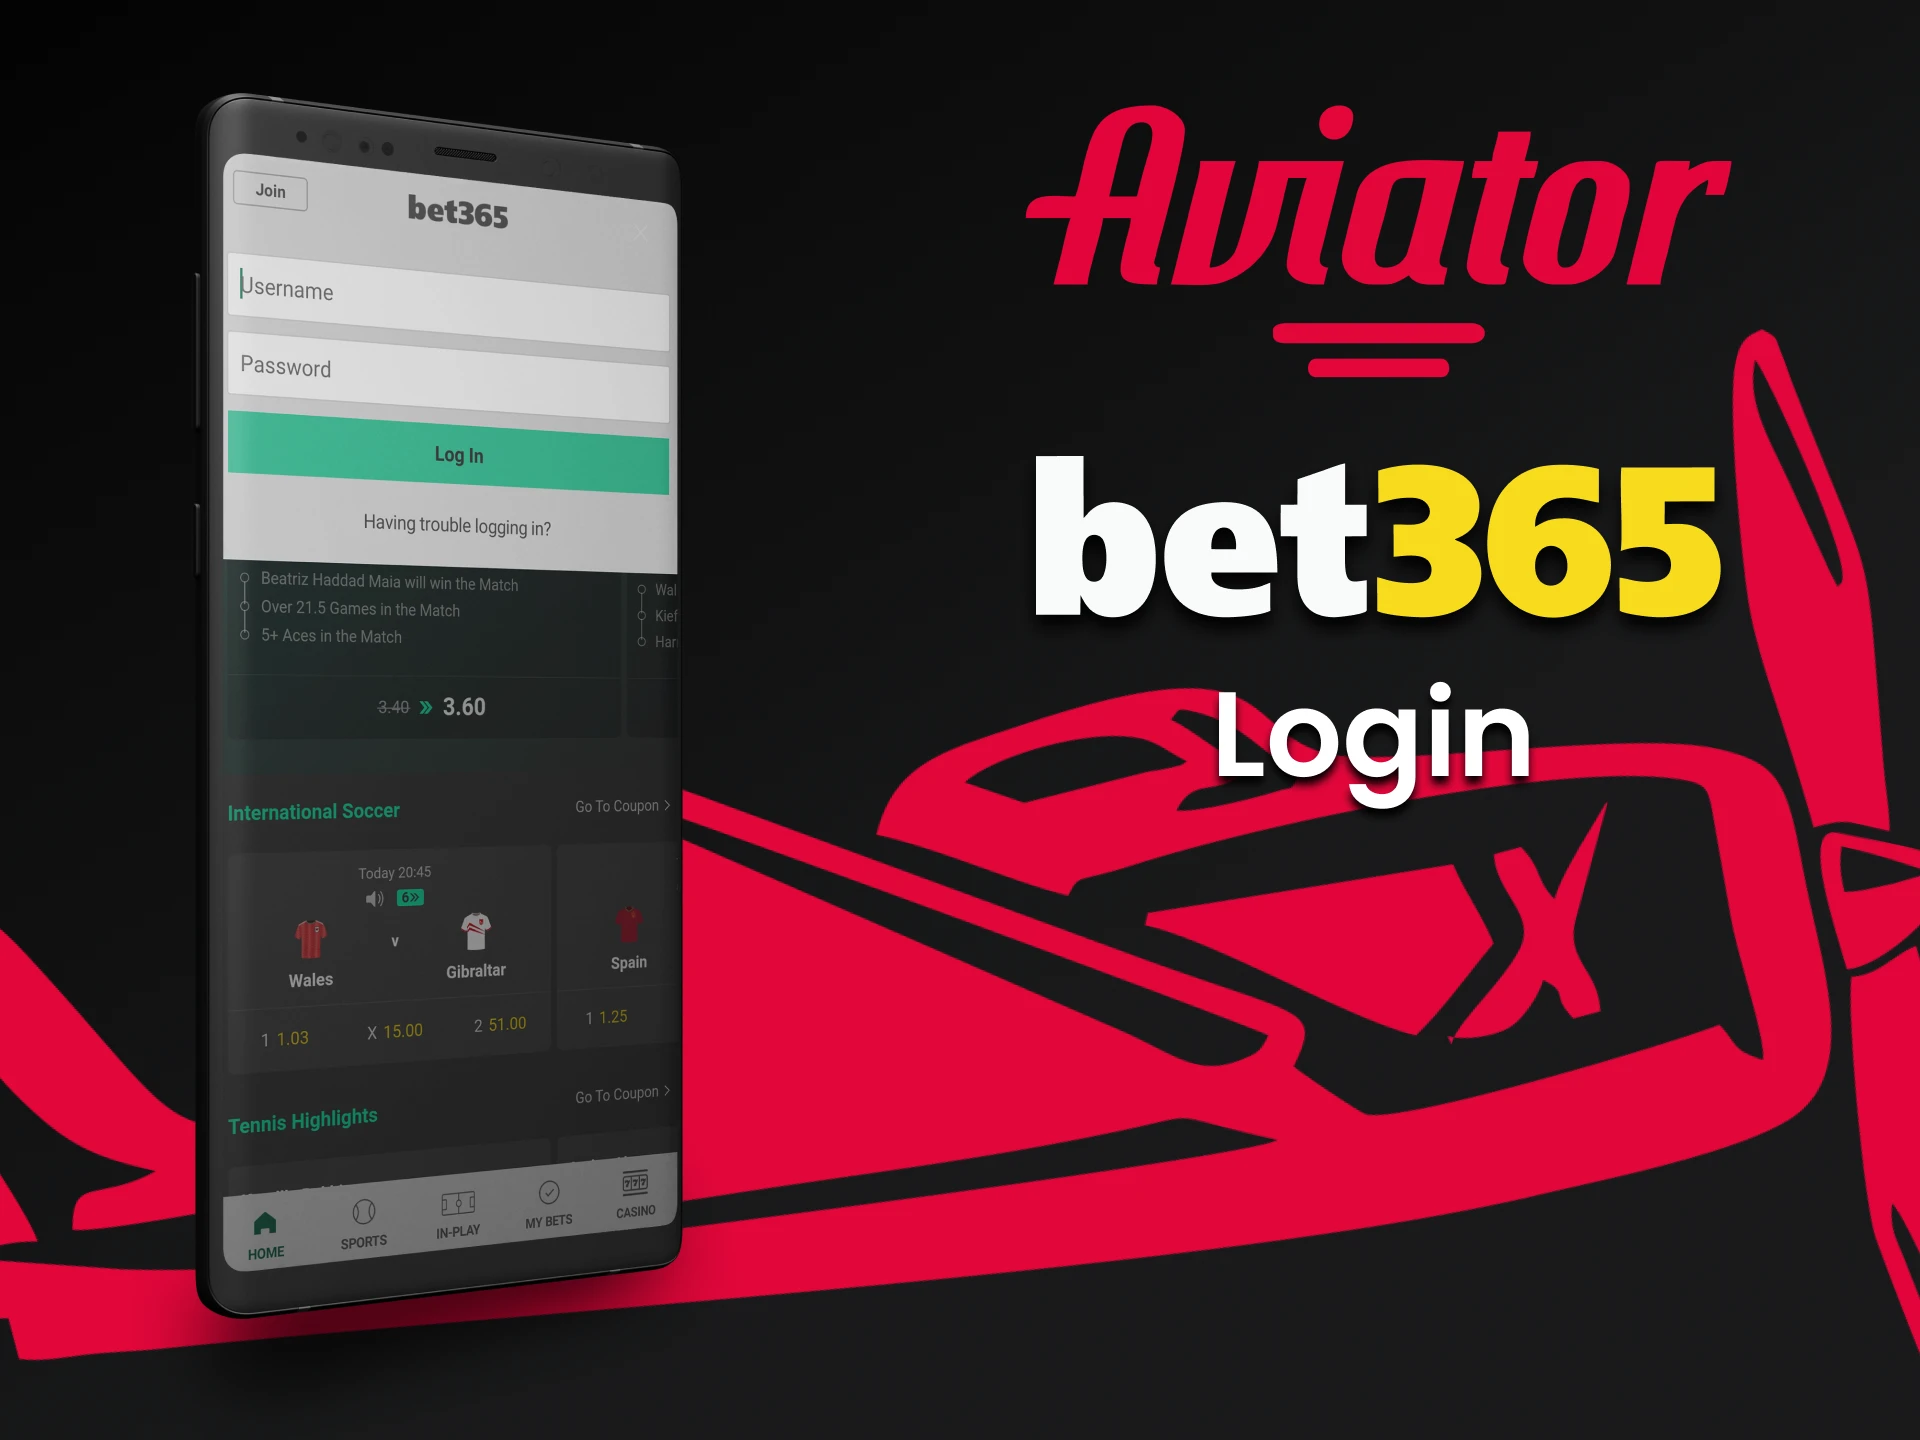 Log in to your account through the Bet365 application to play Aviator.